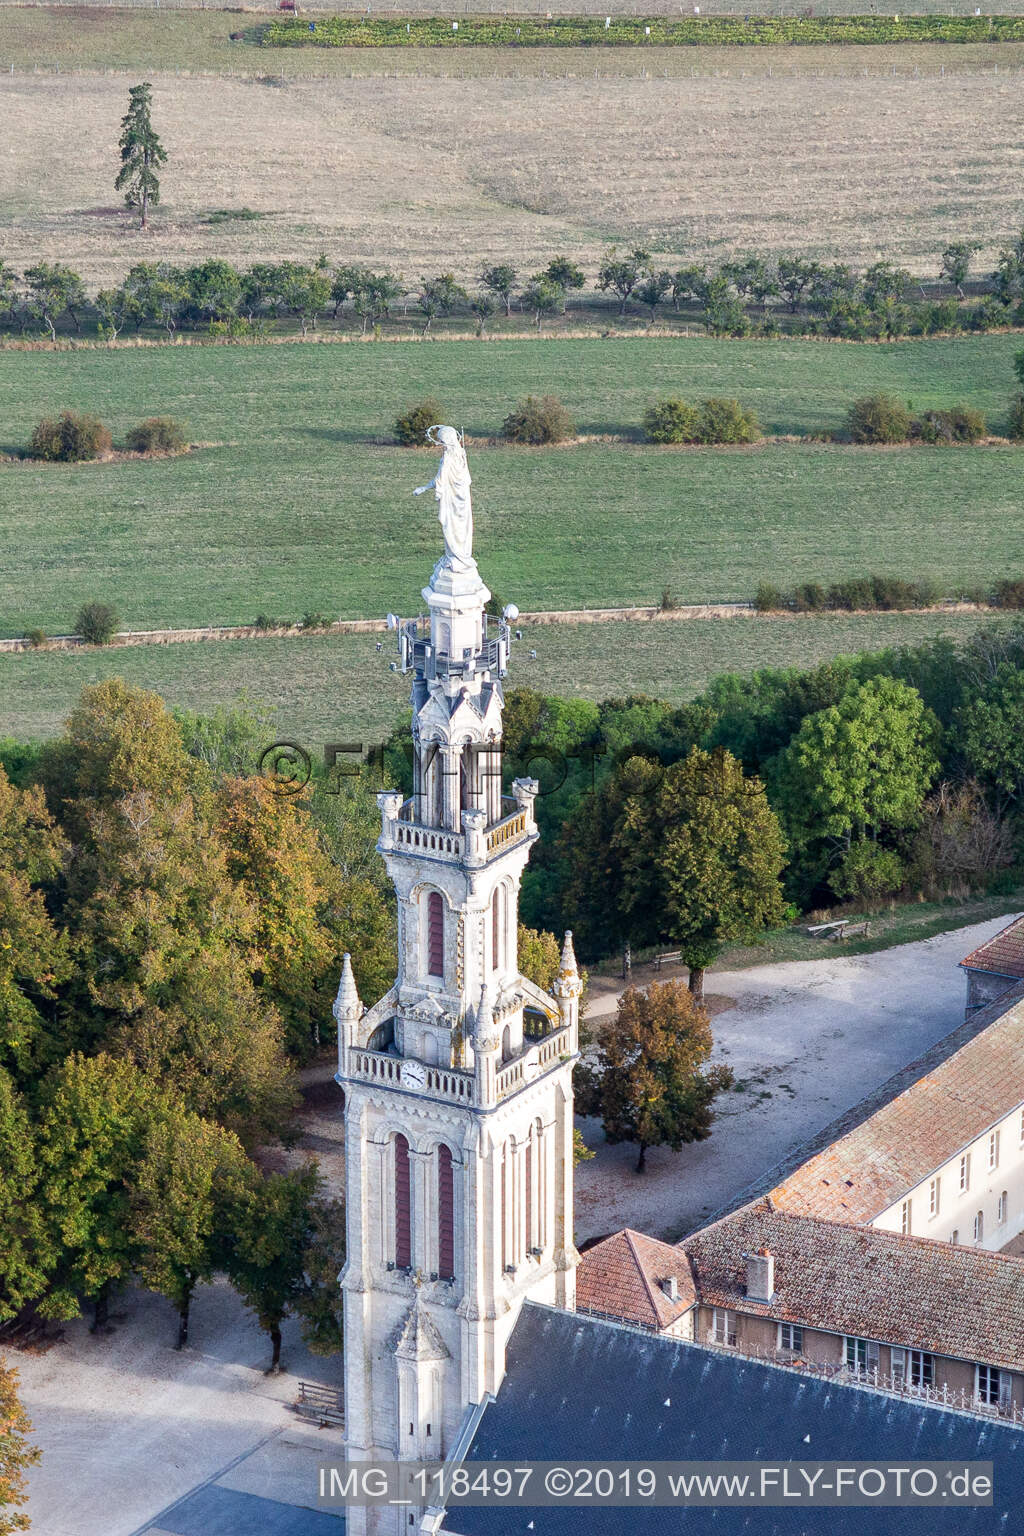 Basilica of Sion in Saxon-Sion in the state Meurthe et Moselle, France seen from a drone